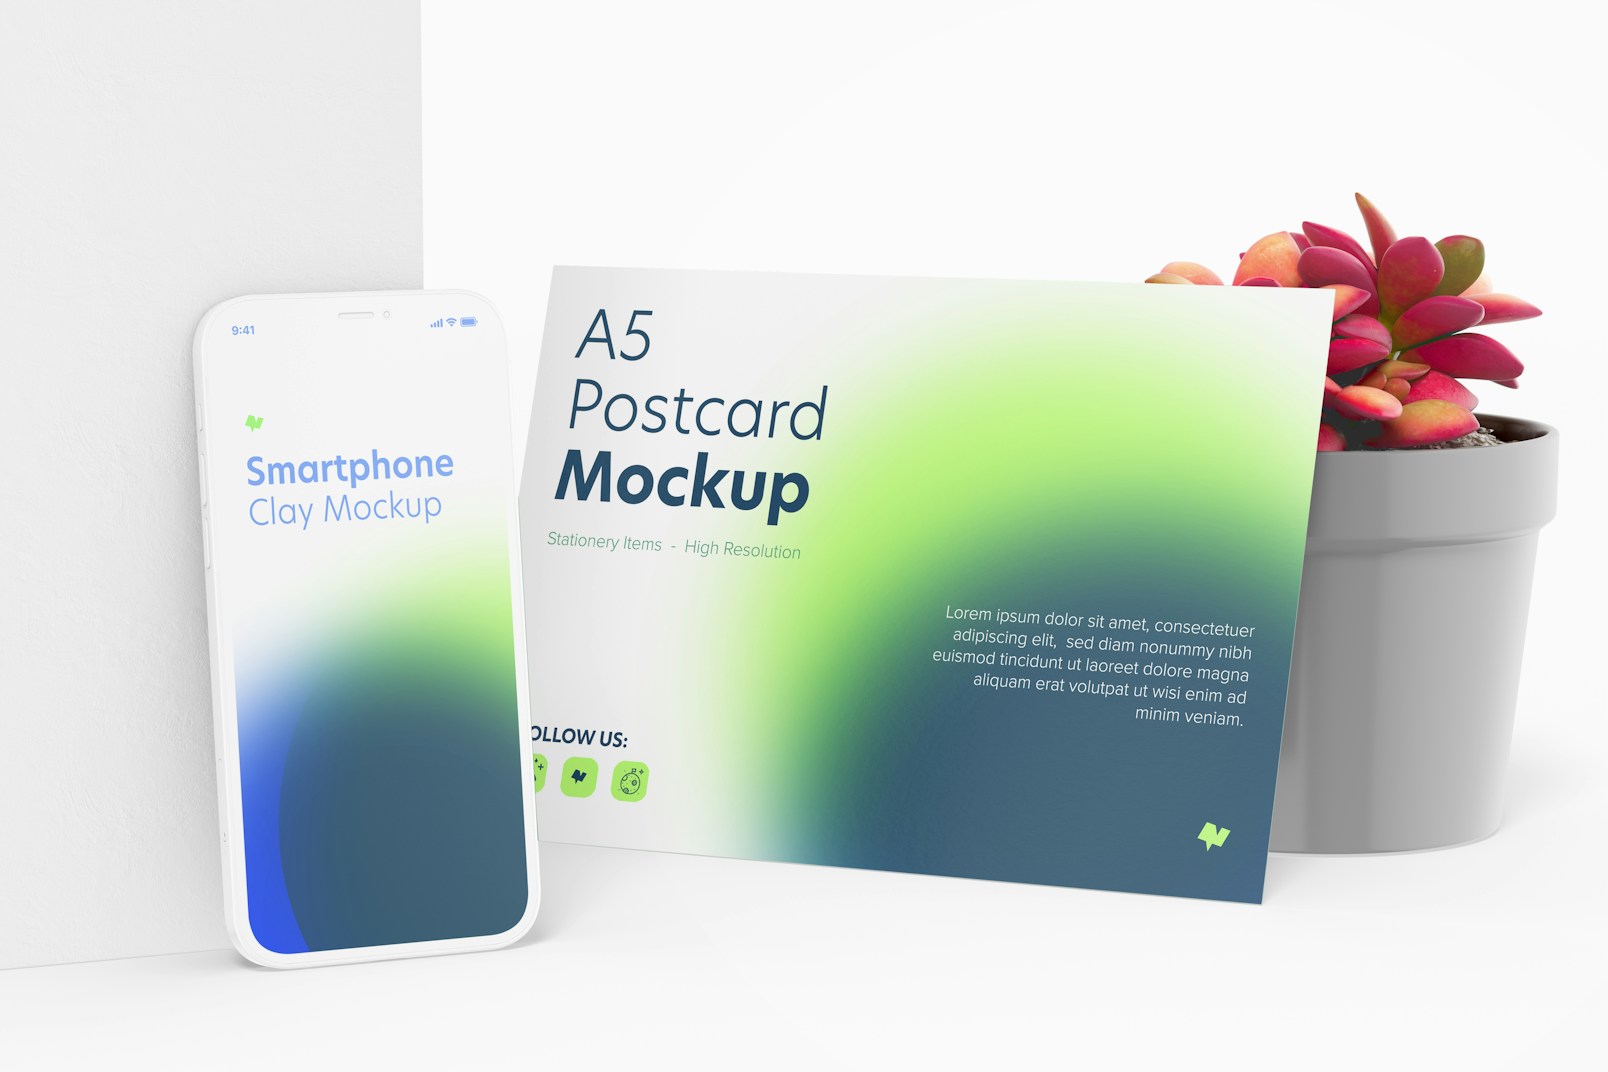 A5 Postcard with iPhone Mockup, Leaned